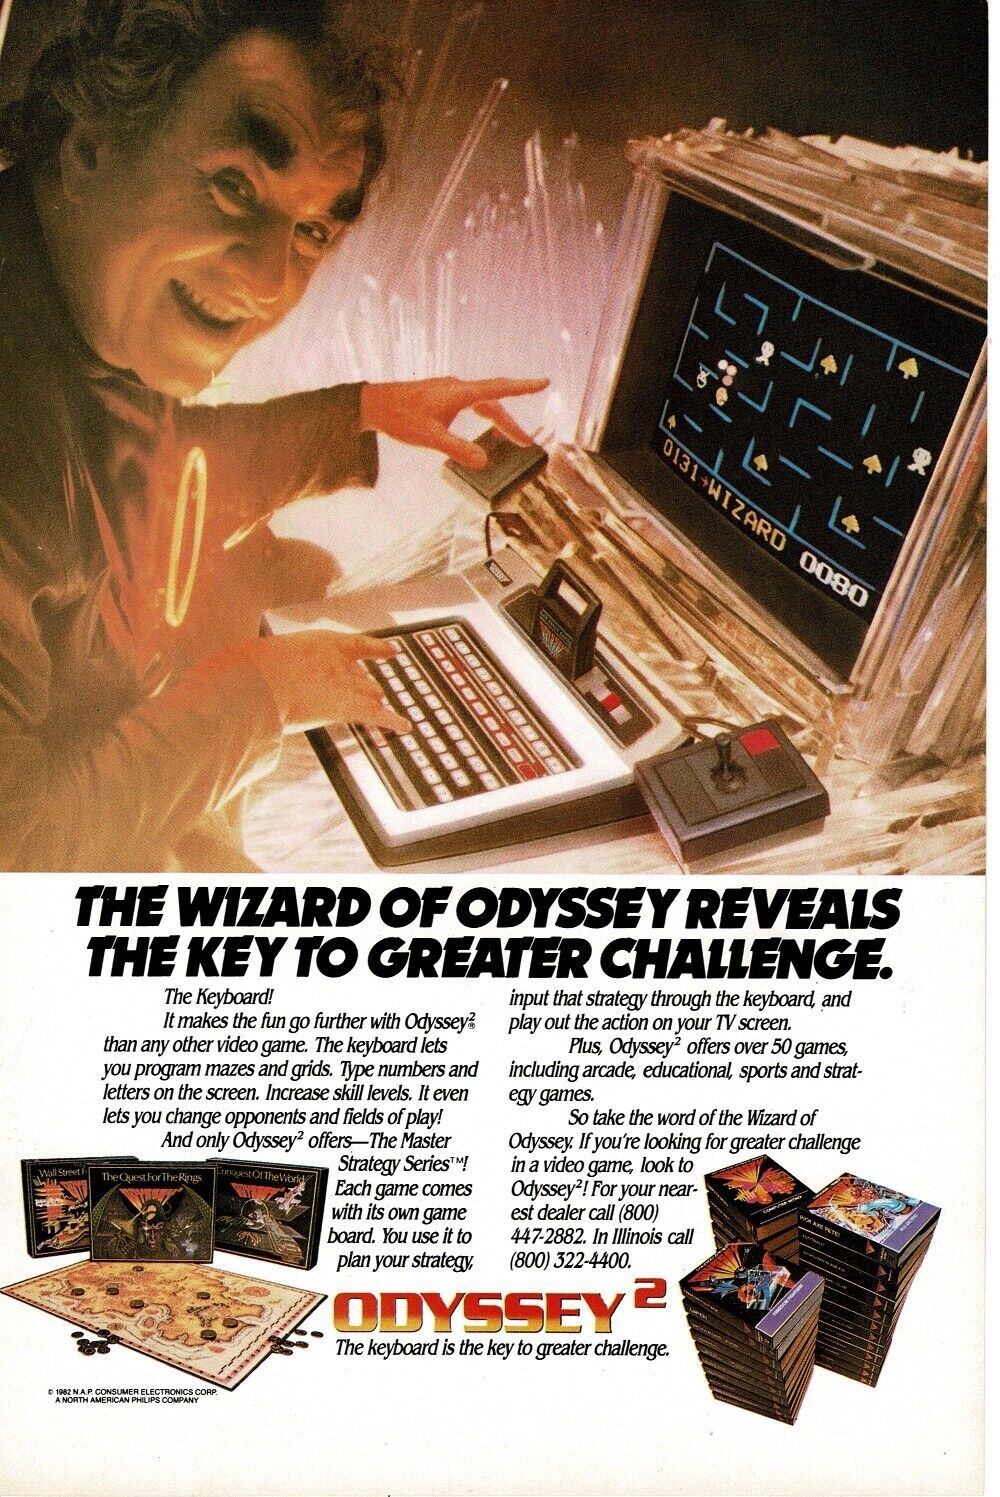 1982 Magnavox Odyssey 2 Video Game Console Vintage Print Ad